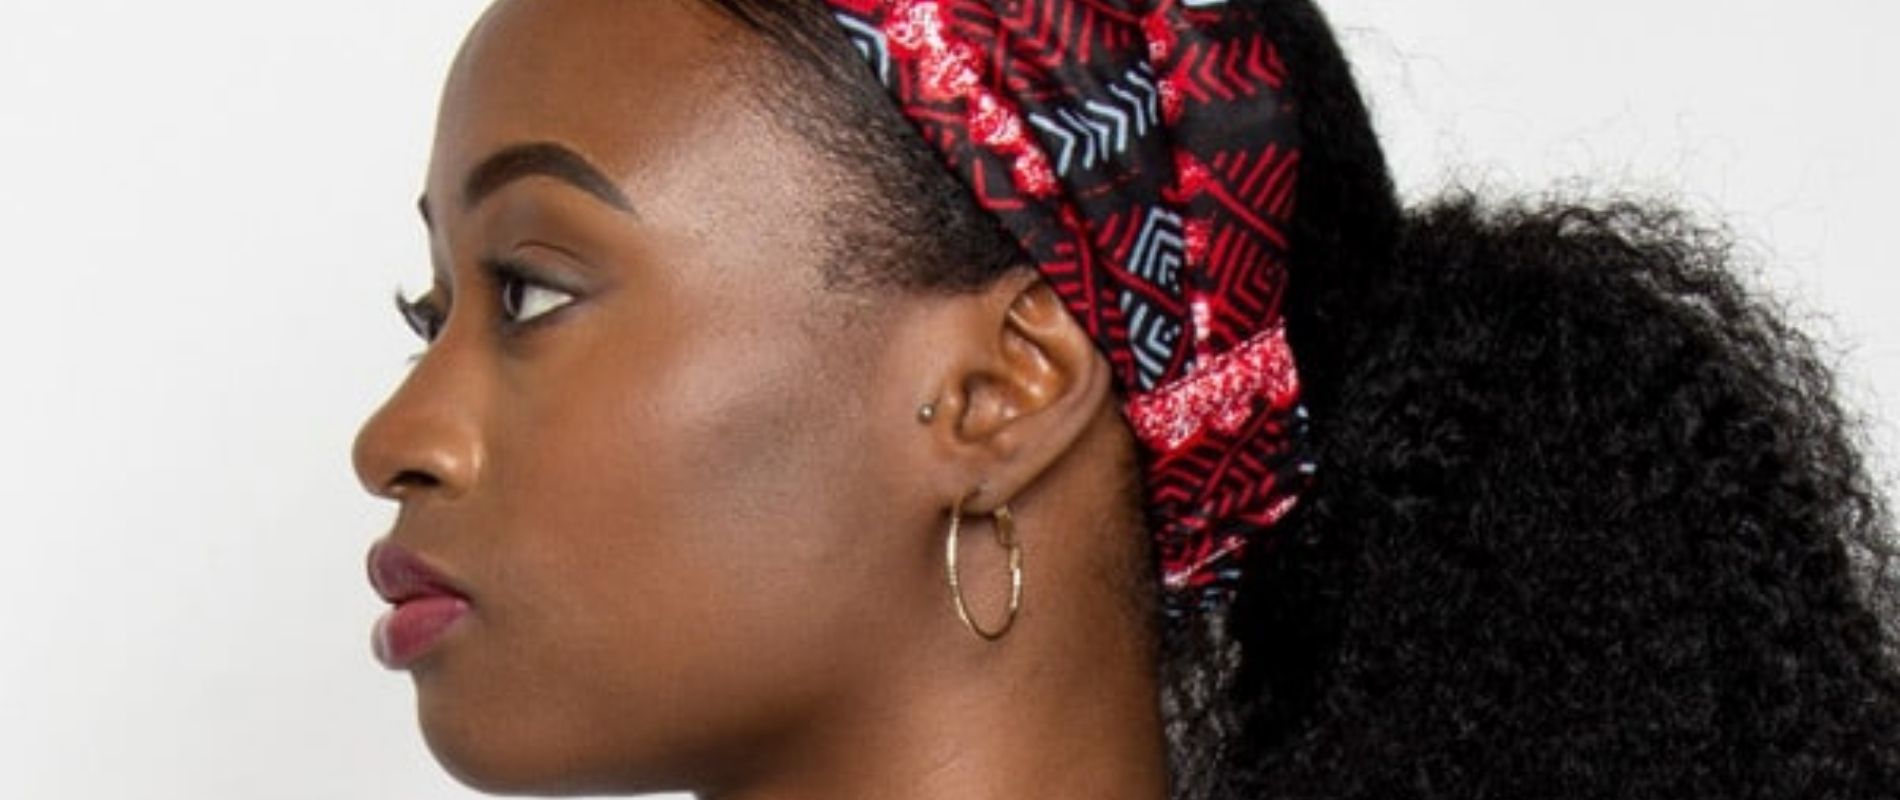 Loza Tam African Headbands: Protect Your Hair and Look Good Doing it!